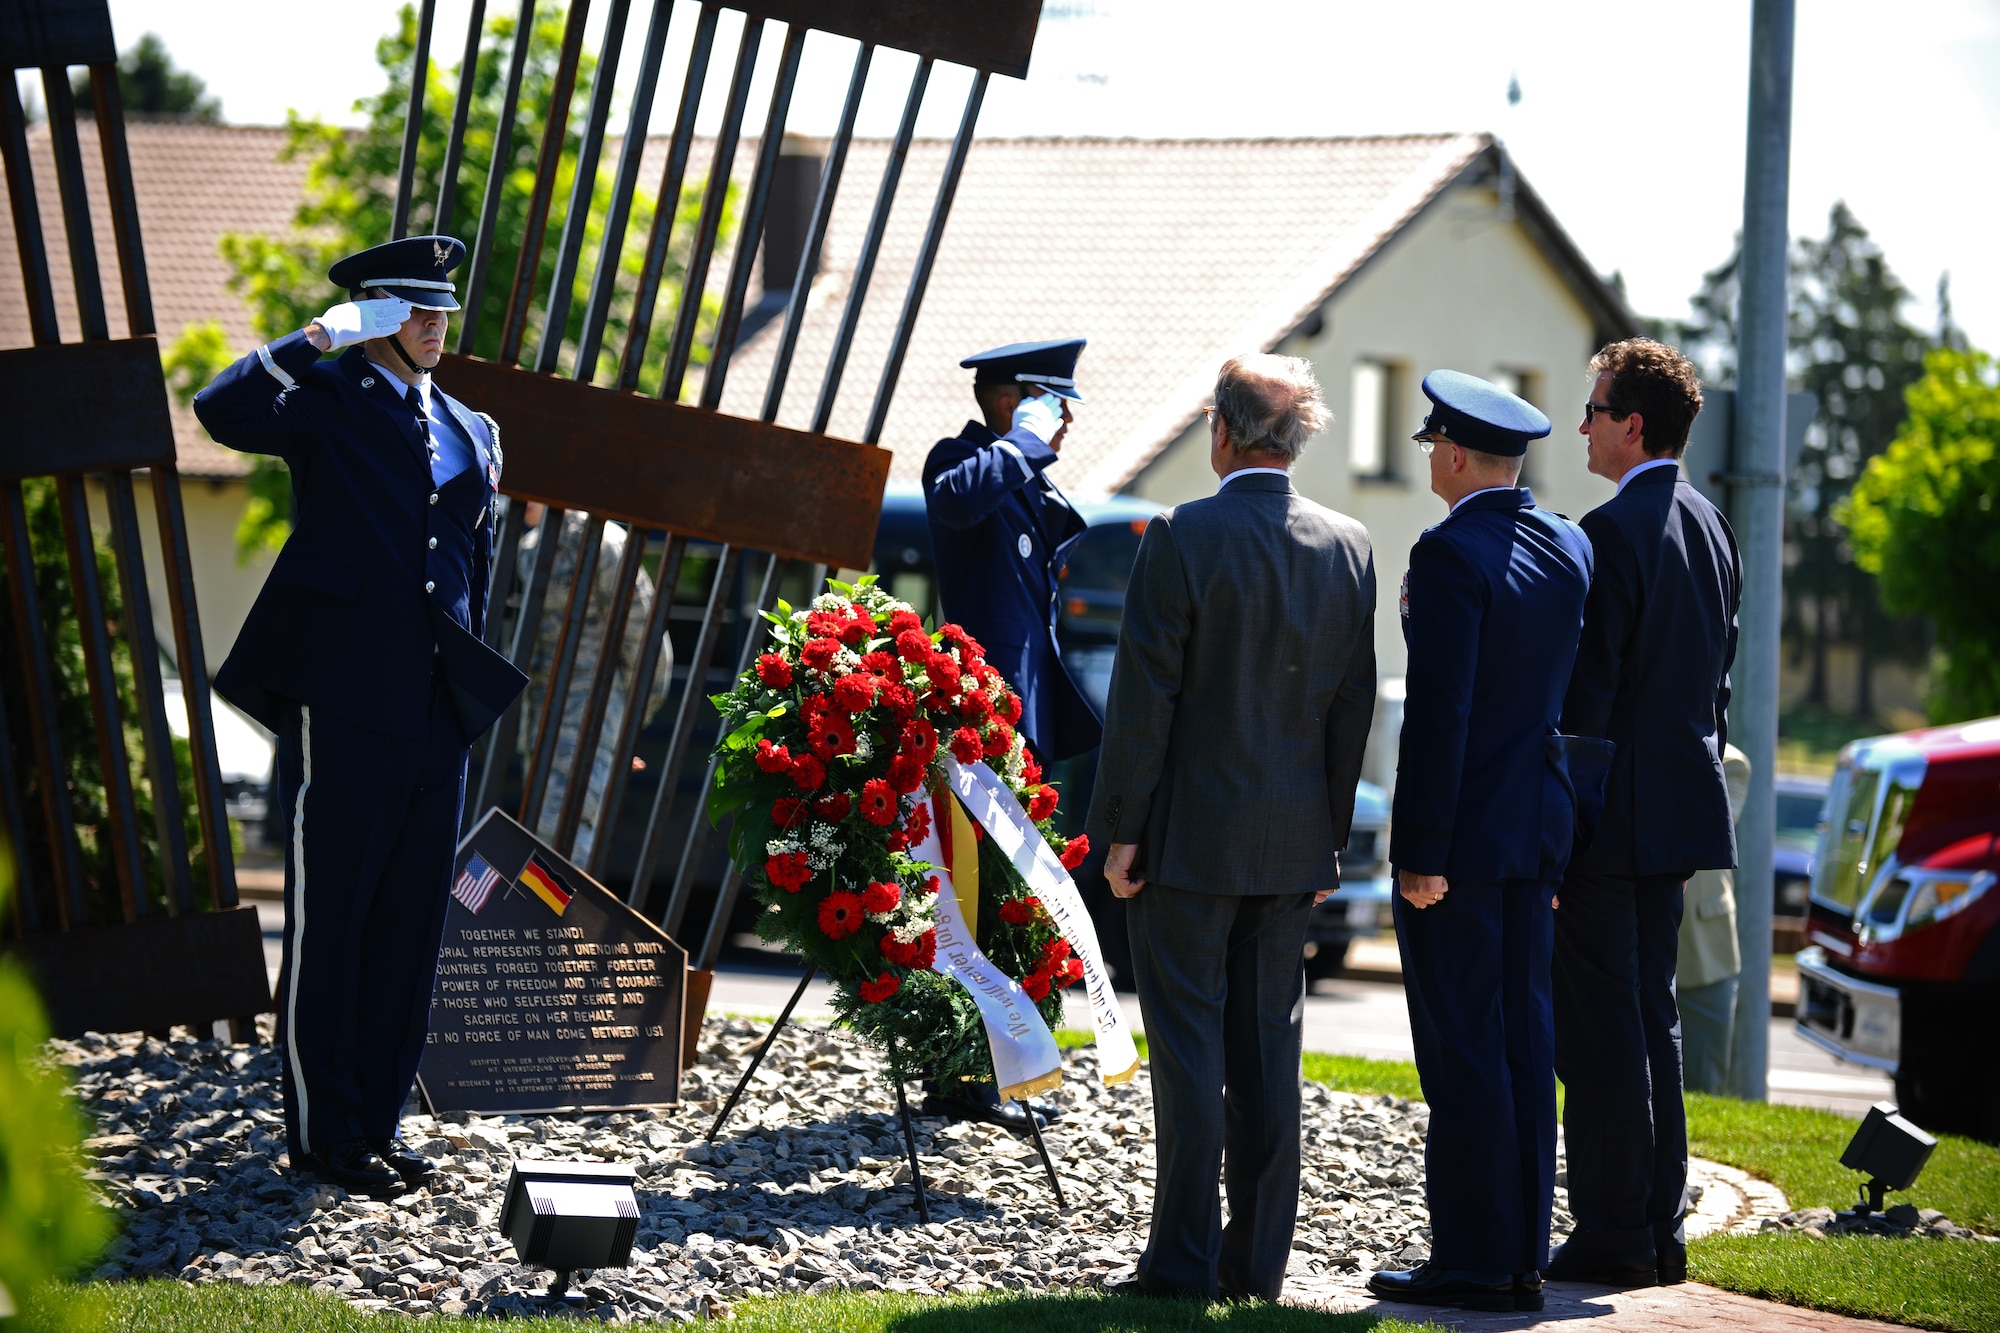 SPANGDAHLEM AIR BASE, Germany – Two 52nd Fighter Wing Honor Guard members and Col. Chris Weggeman, 52nd Fighter Wing commander, salute during the wreath-laying ceremony at the 9/11 memorial dedication while Michael Dietzsch, left, Host Nation Council Spangdahlem chairman, and Joachim Streit, Bitburg-Pruem Eifel County county commissioner, look on while “Taps” is played here May 25. The 9/11 memorial was donated to the 52nd FW by the Host Nation Council and local businesses.  The sculpture was designed by Hubert Kruft, artist, from Niederpruem. (U.S. Air Force photo by Airman 1st Class Matthew B. Fredericks/Released)